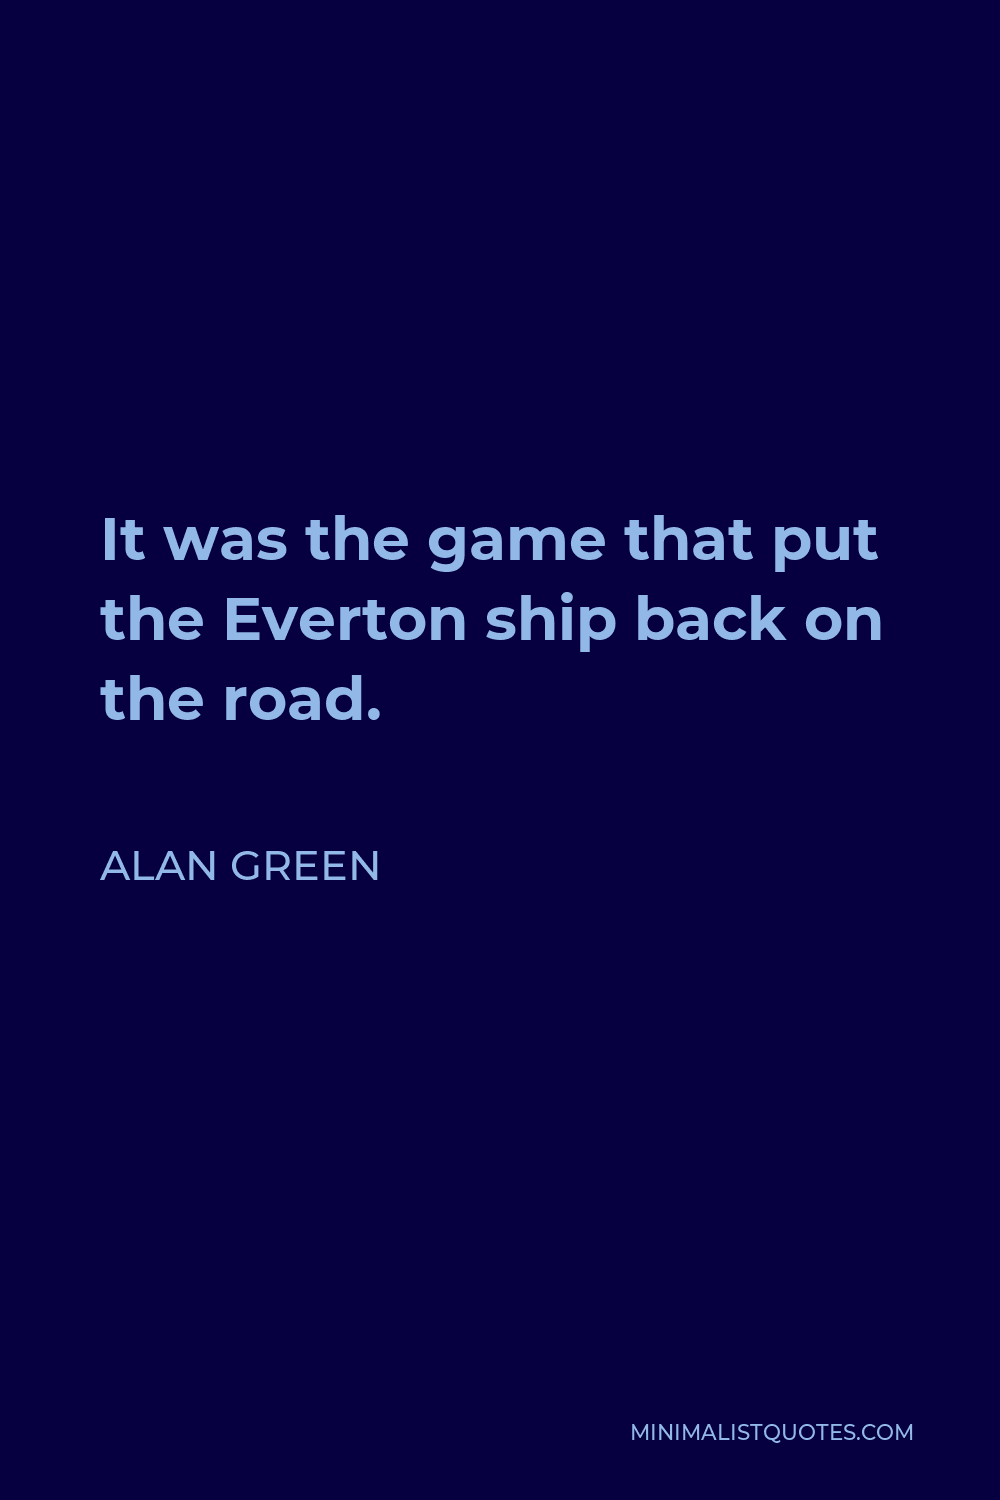 Alan Green Quote - It was the game that put the Everton ship back on the road.